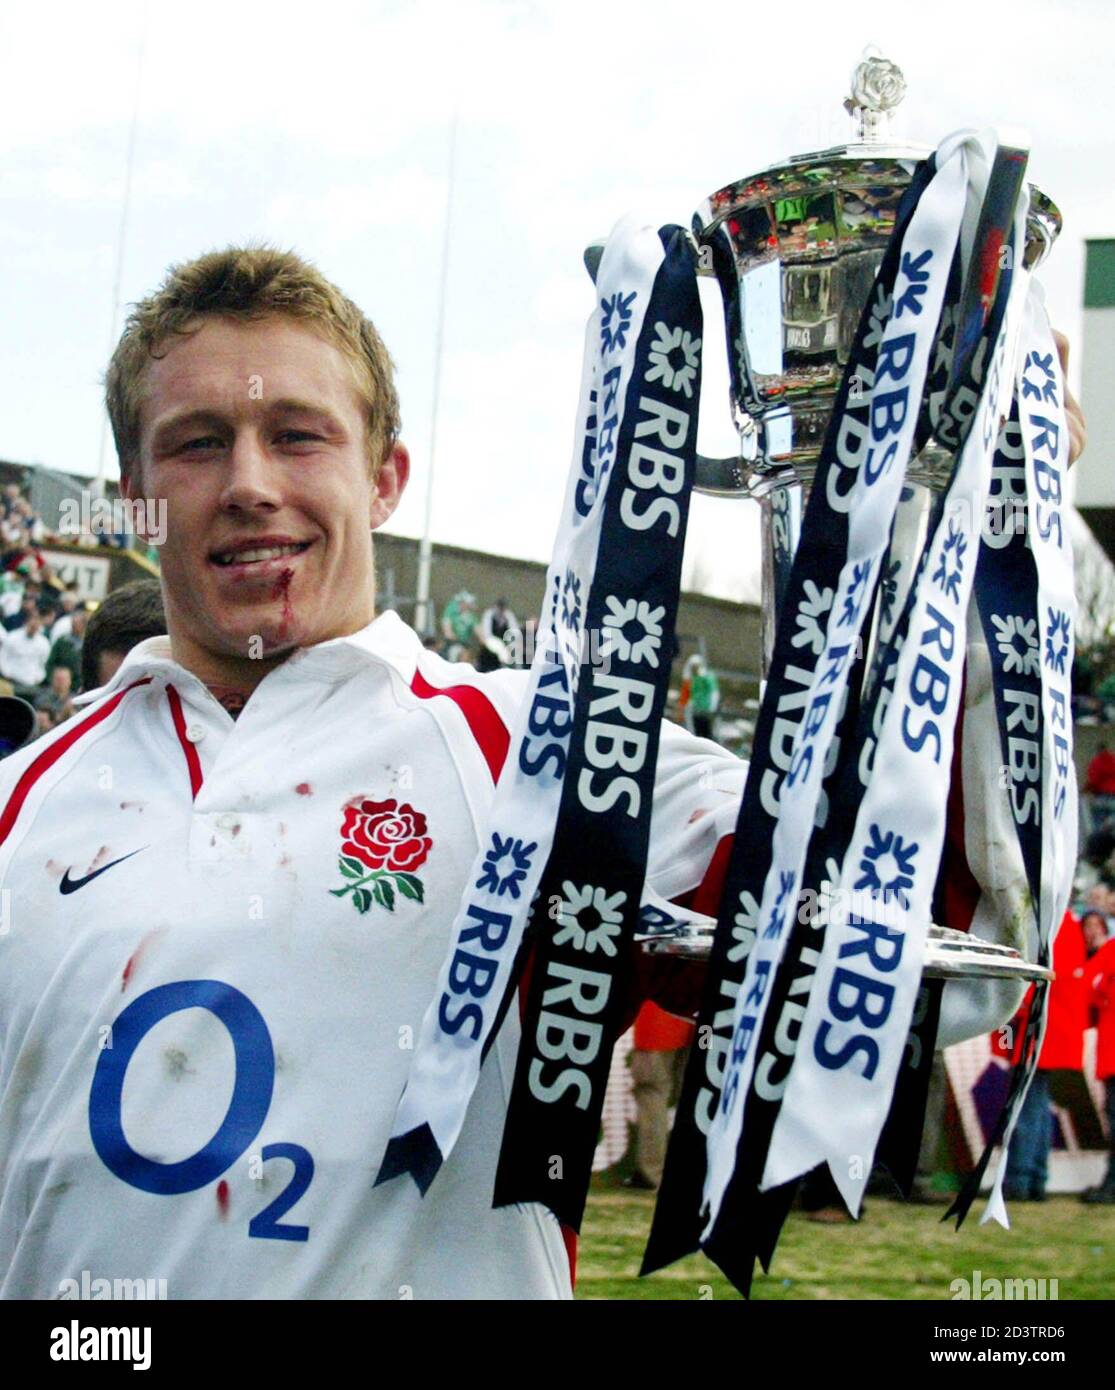 England's Man of the Match Jonny Wilkinson (C) shows off the Six Nations  cup after his team's victory over Ireland at Landsdowne Road, Dublin  Ireland, March 30, 2003. England won the match